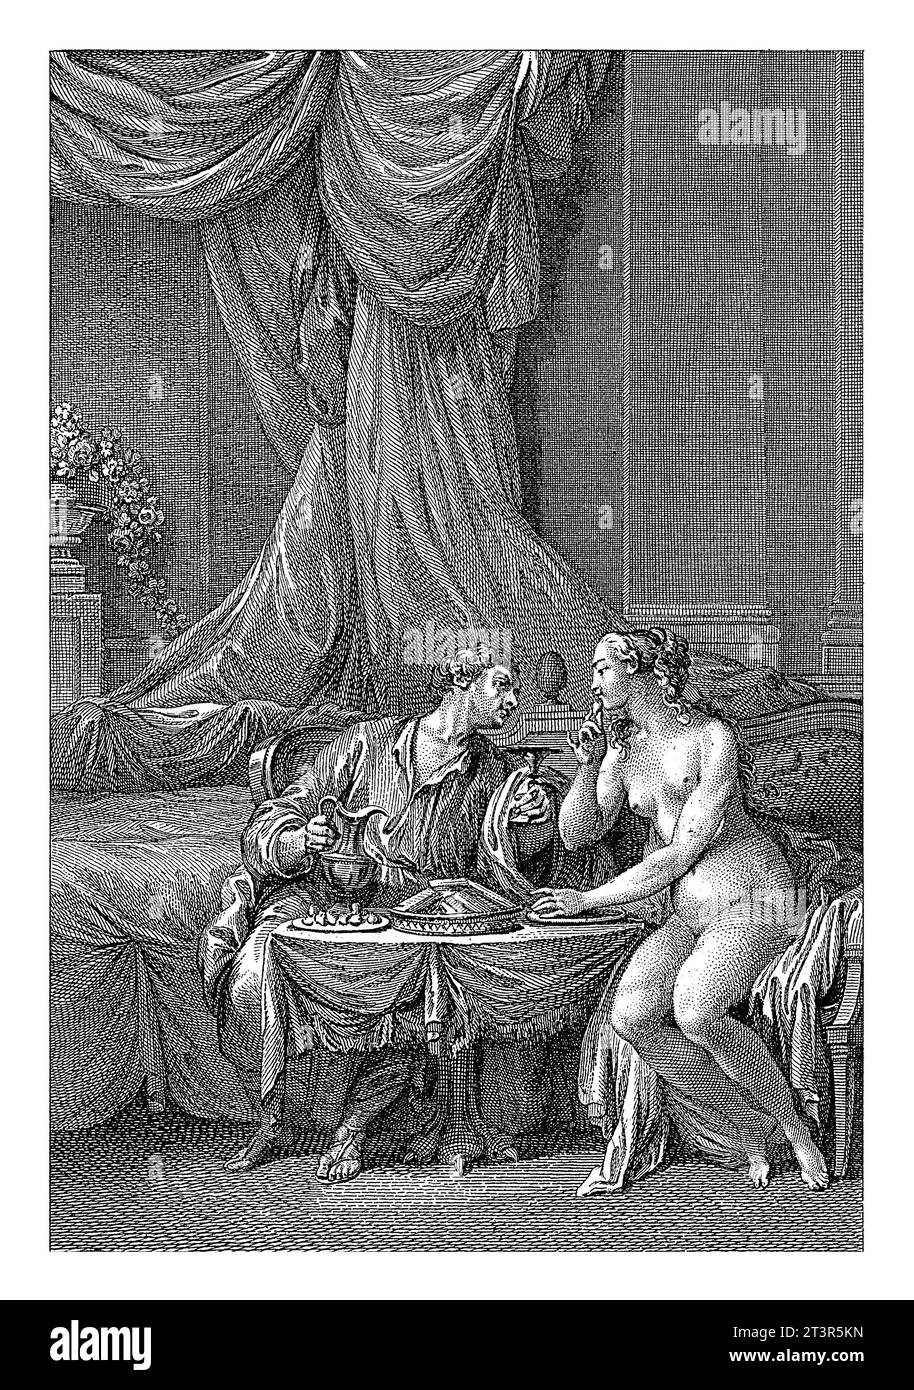 Pygmalion and Galatea at the Dining Table, Emmanuel Jean Nepomucene de Ghendt, after Charles Joseph Dominique Eisen, 1748 - 1815 Stock Photo